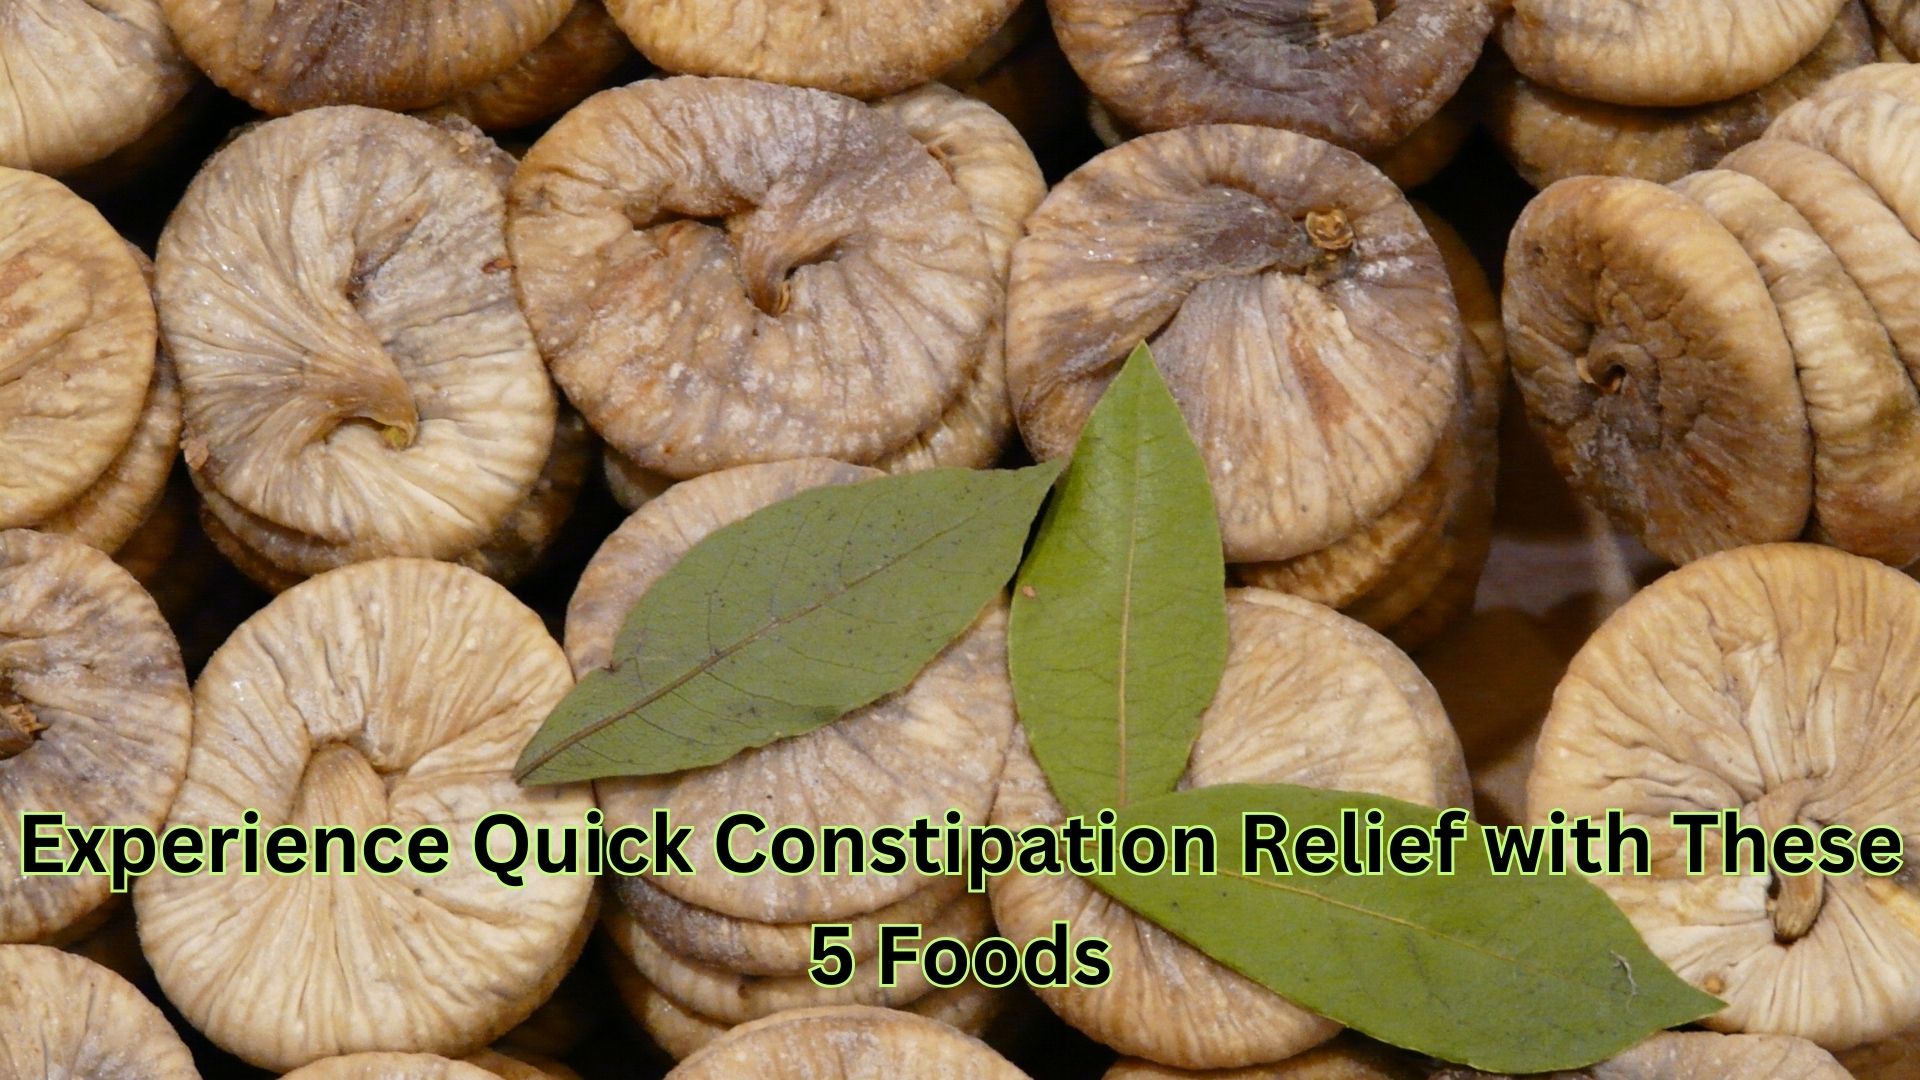 Experience Quick Constipation Relief with These 5 Foods